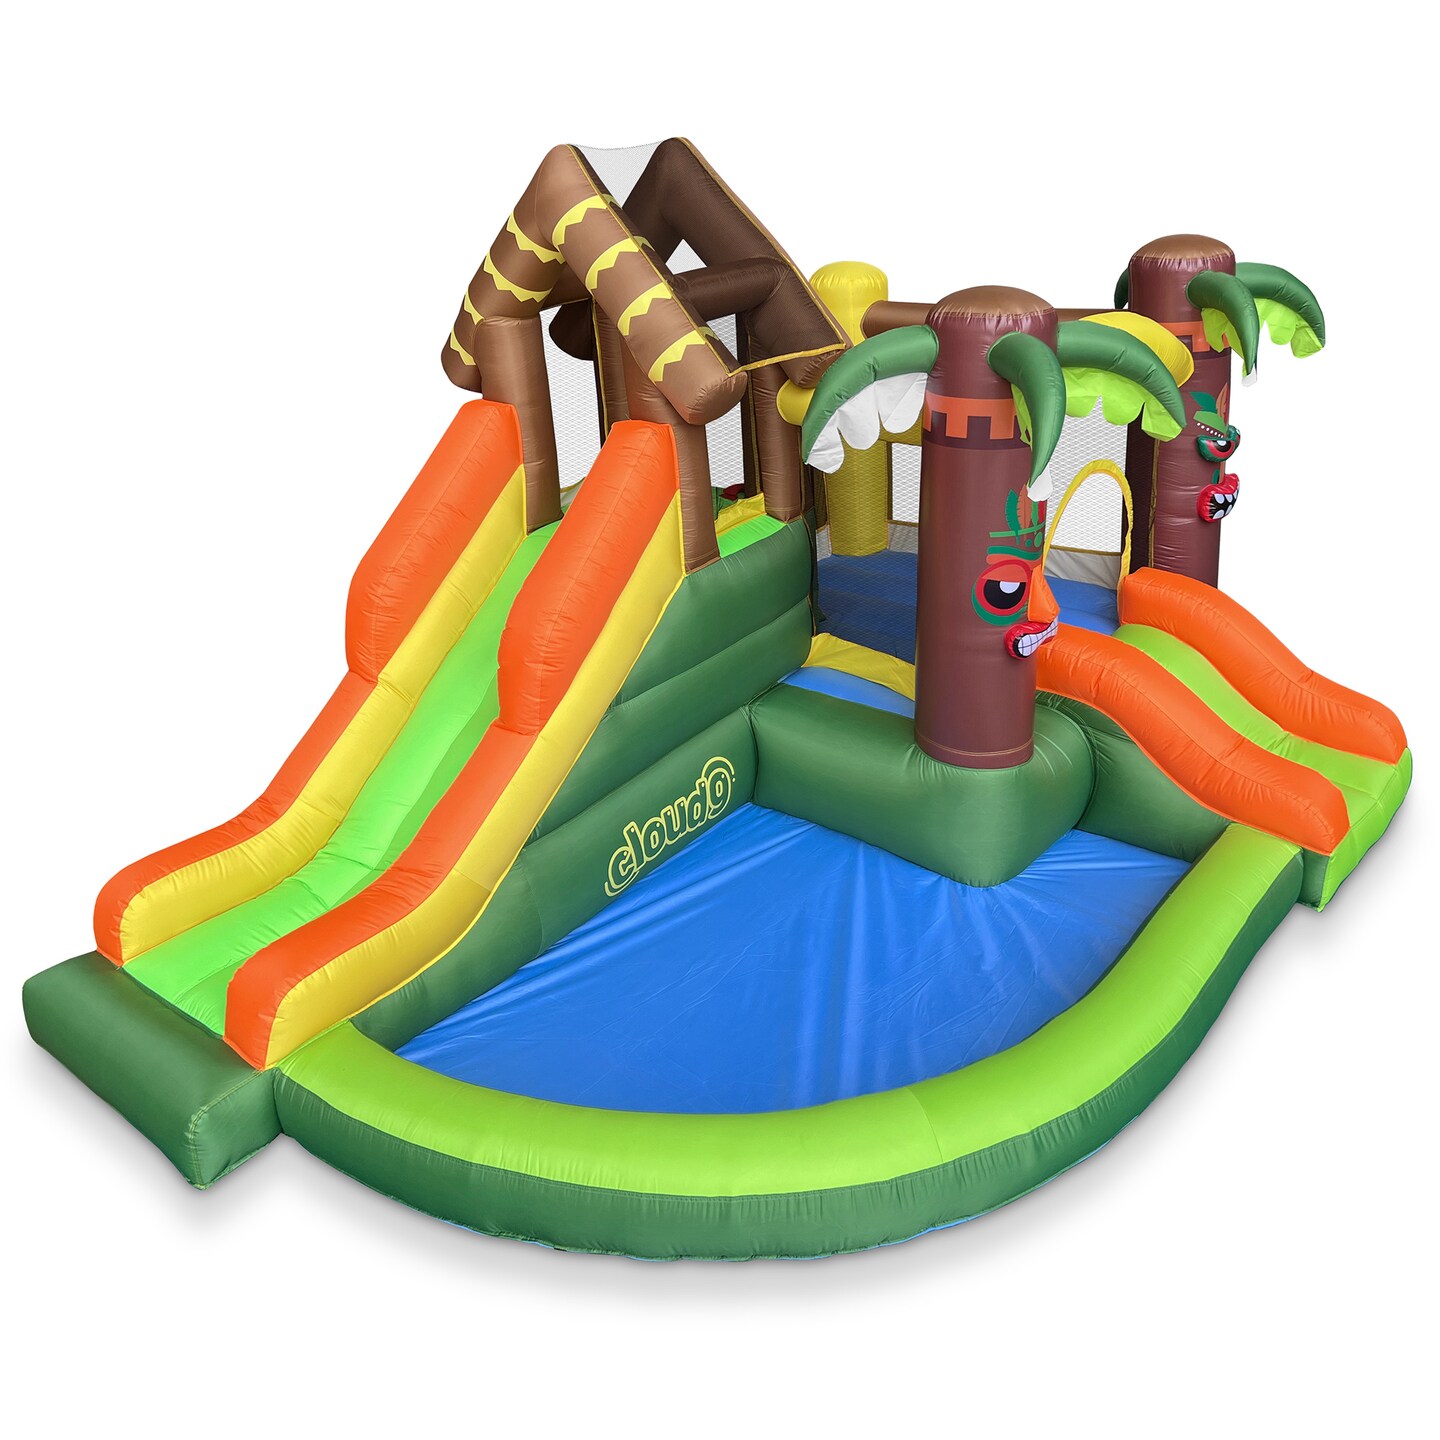 Cloud 9 Inflatable Jungle Bounce House with Blower, Bouncer for Kids with Two Slides, Jumping Area, and Ball Pit